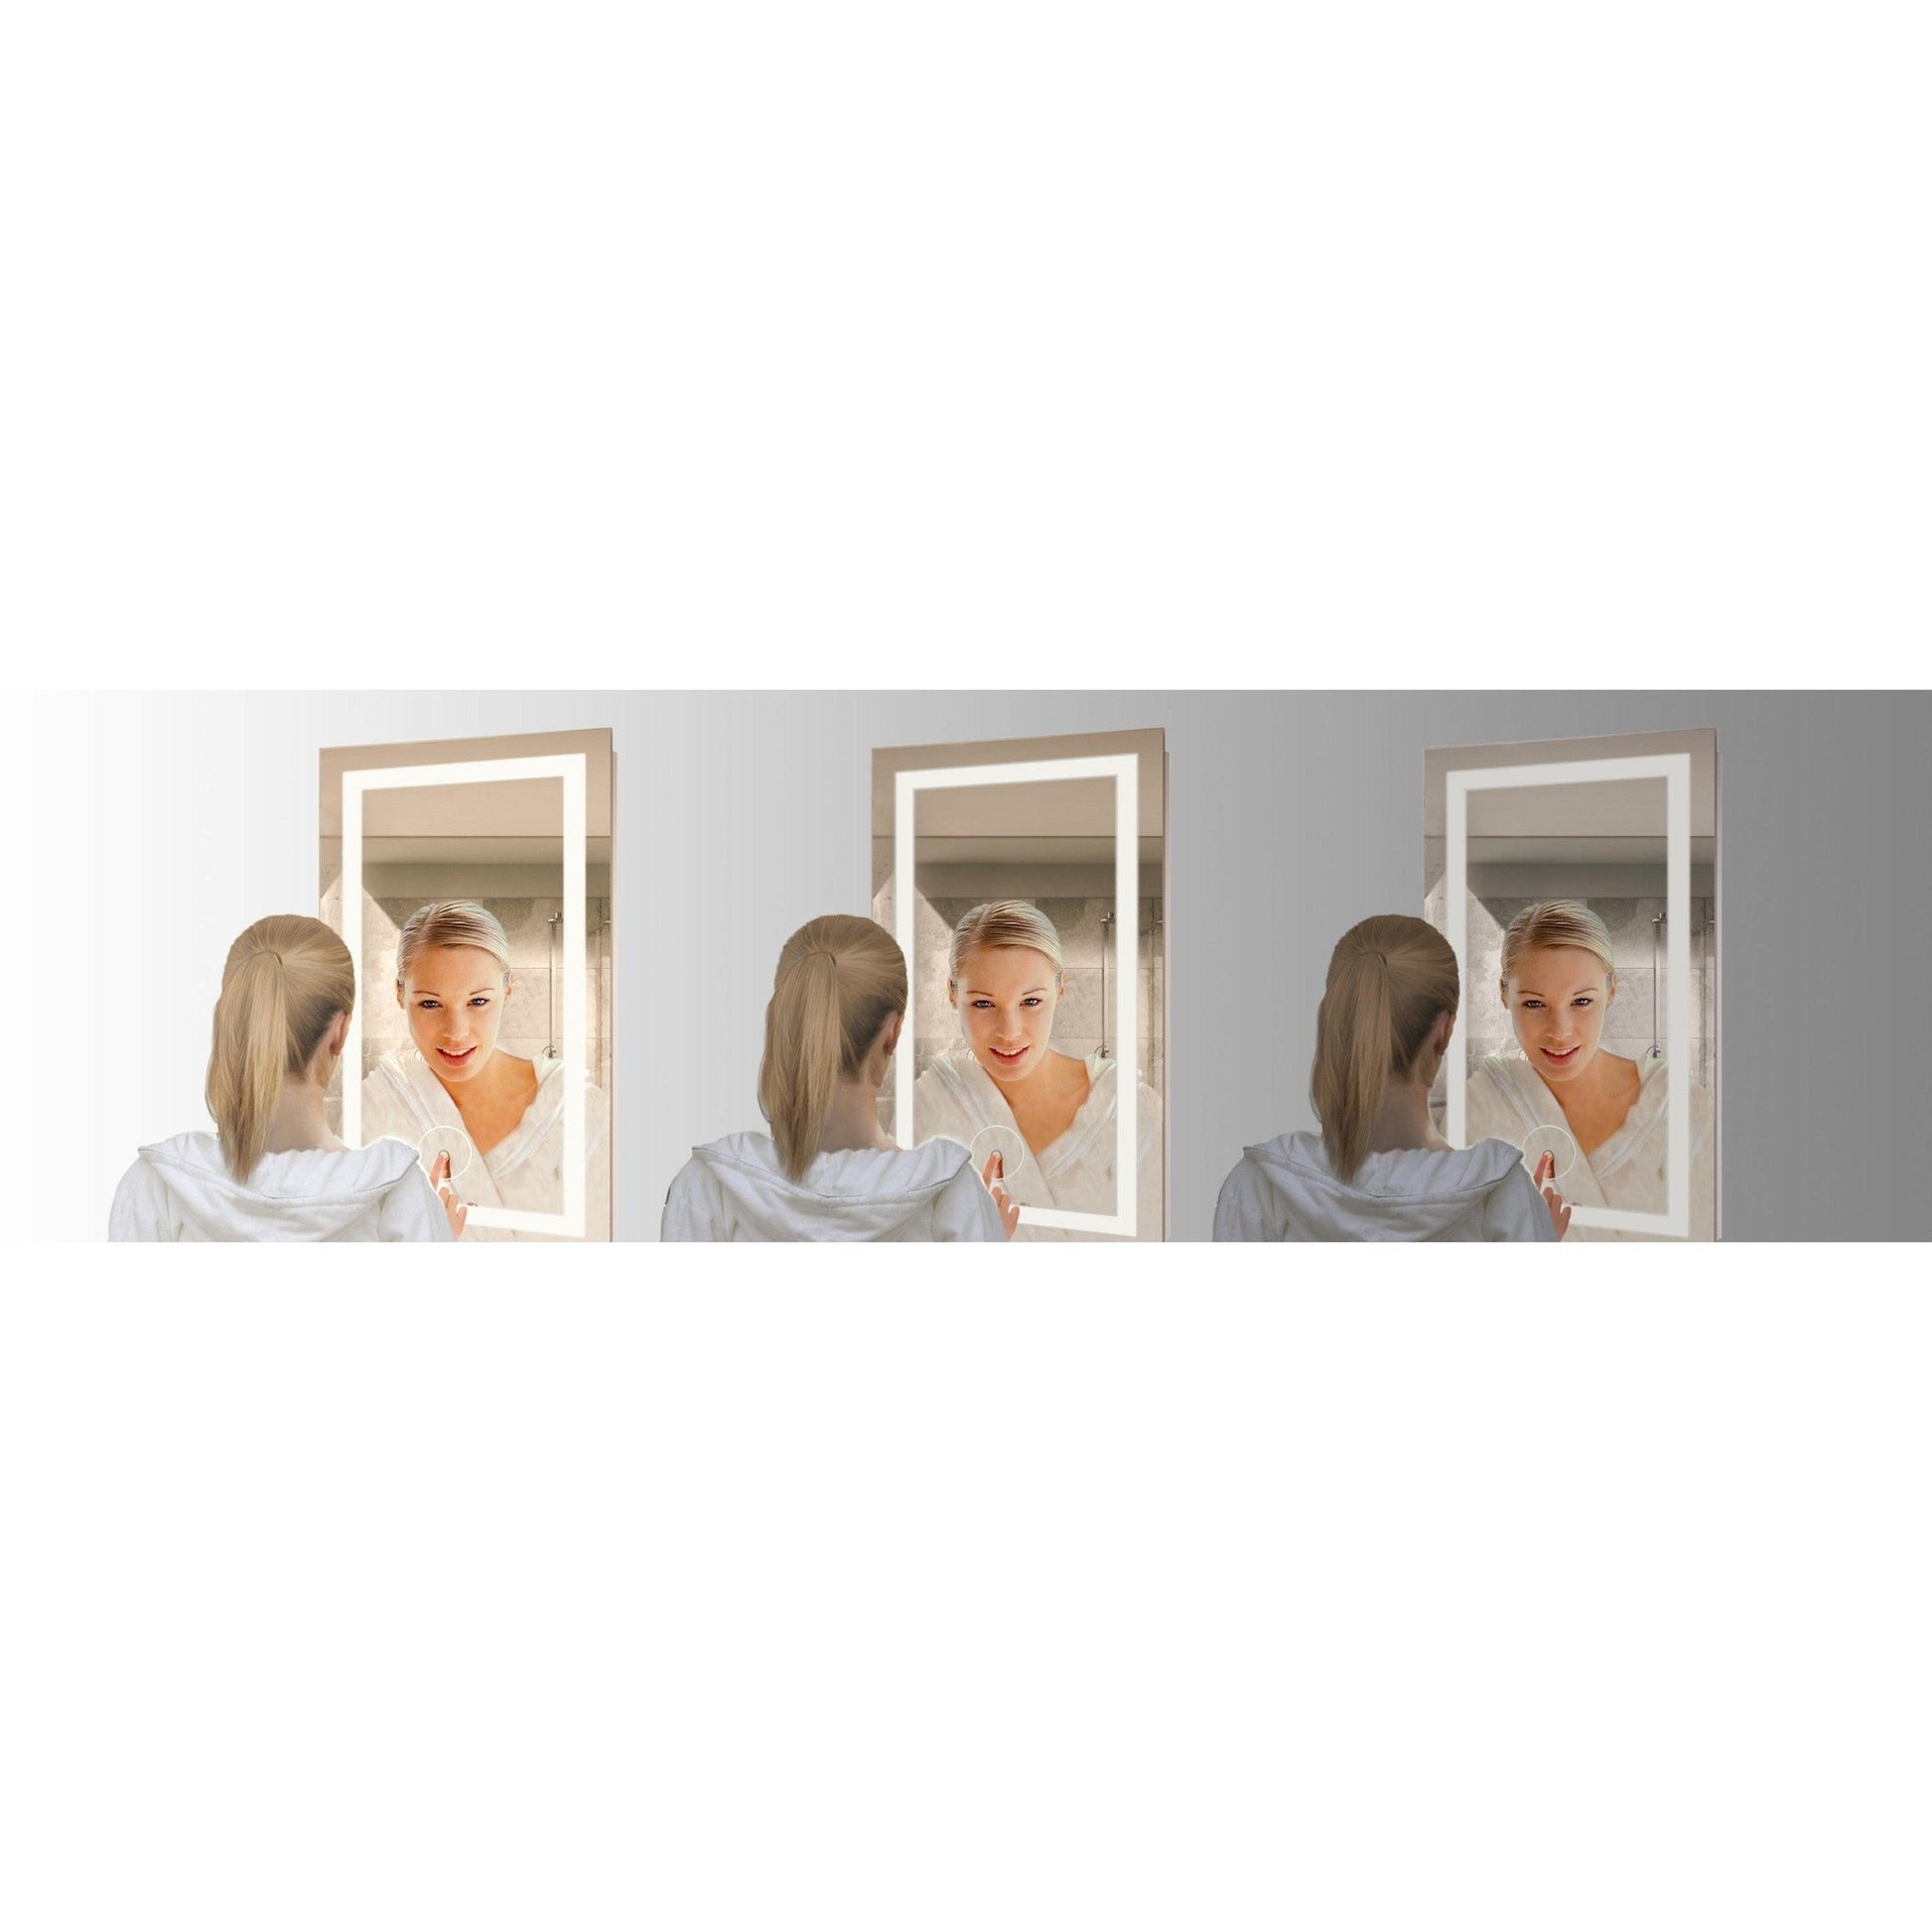 Krugg Reflections Icon 24" x 30" 5000K Rectangular Wall-Mounted Illuminated Silver Backed LED Mirror With Built-in Defogger and Touch Sensor On/Off Built-in Dimmer